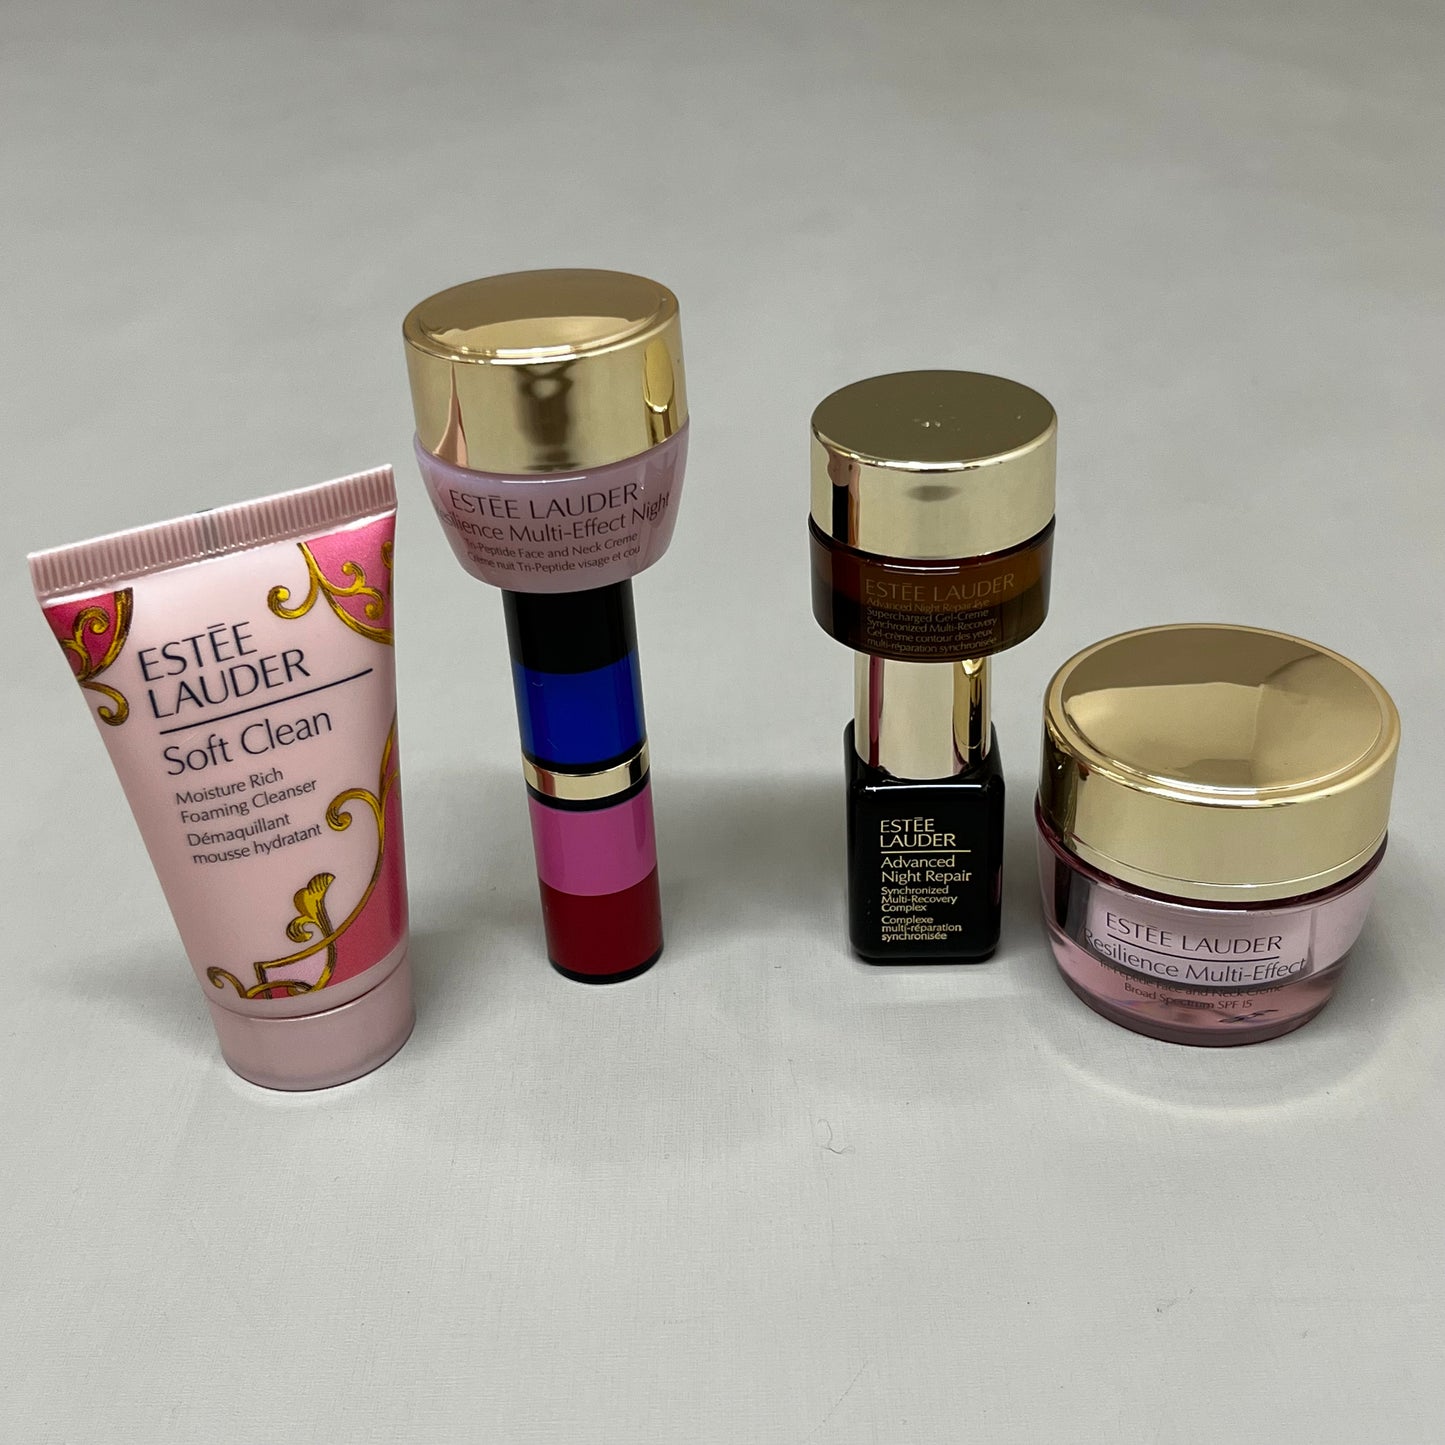 ESTEE LAUDER 6-Piece Gift Set of Cosmetics Bag Included Beauty Products 030548484 (New)